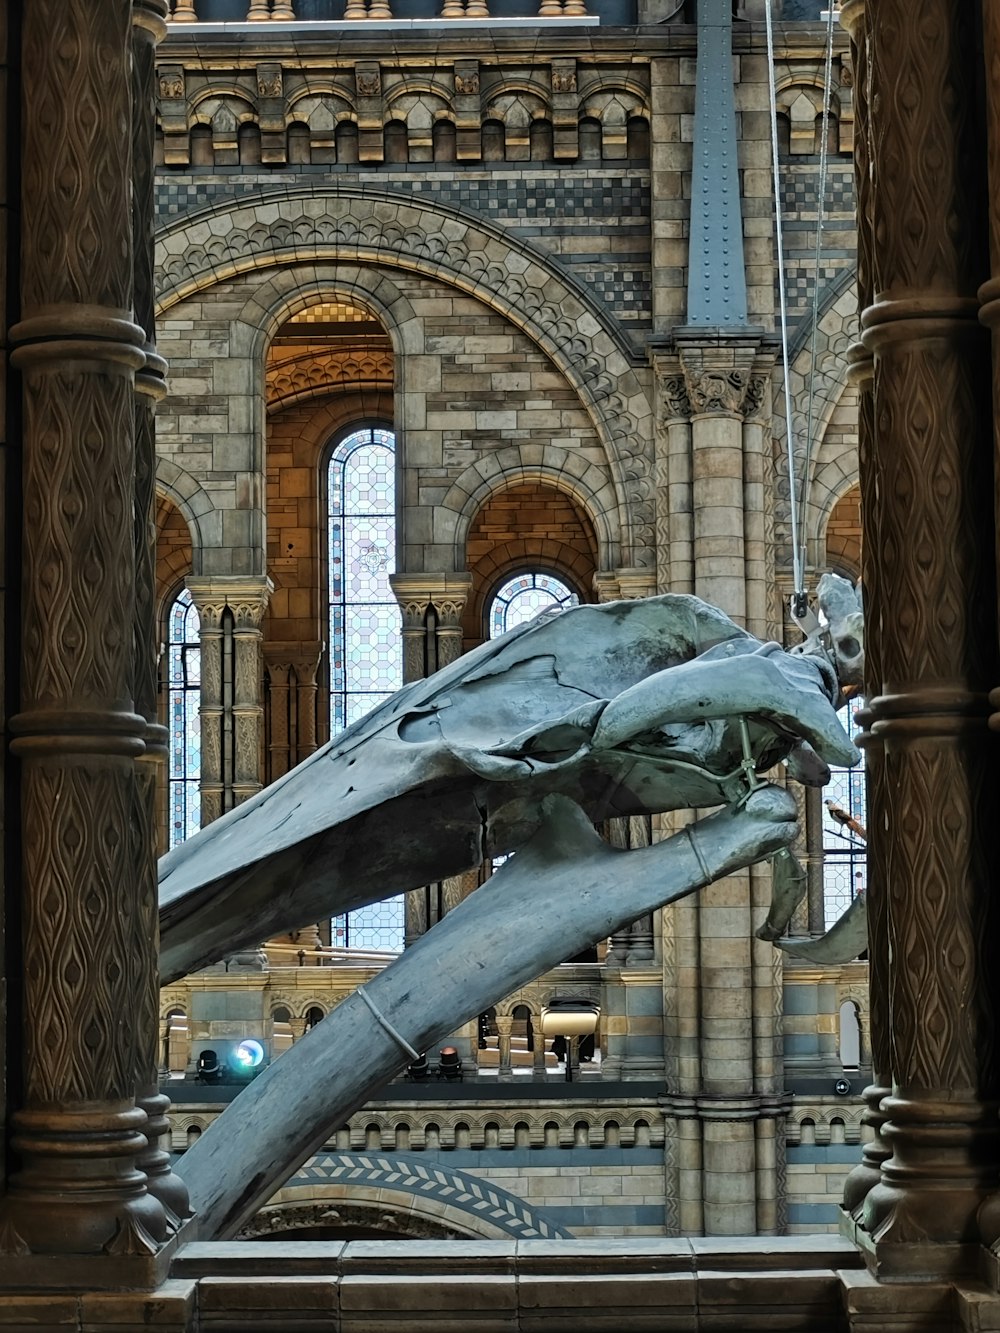 a statue of a dragon in a large building